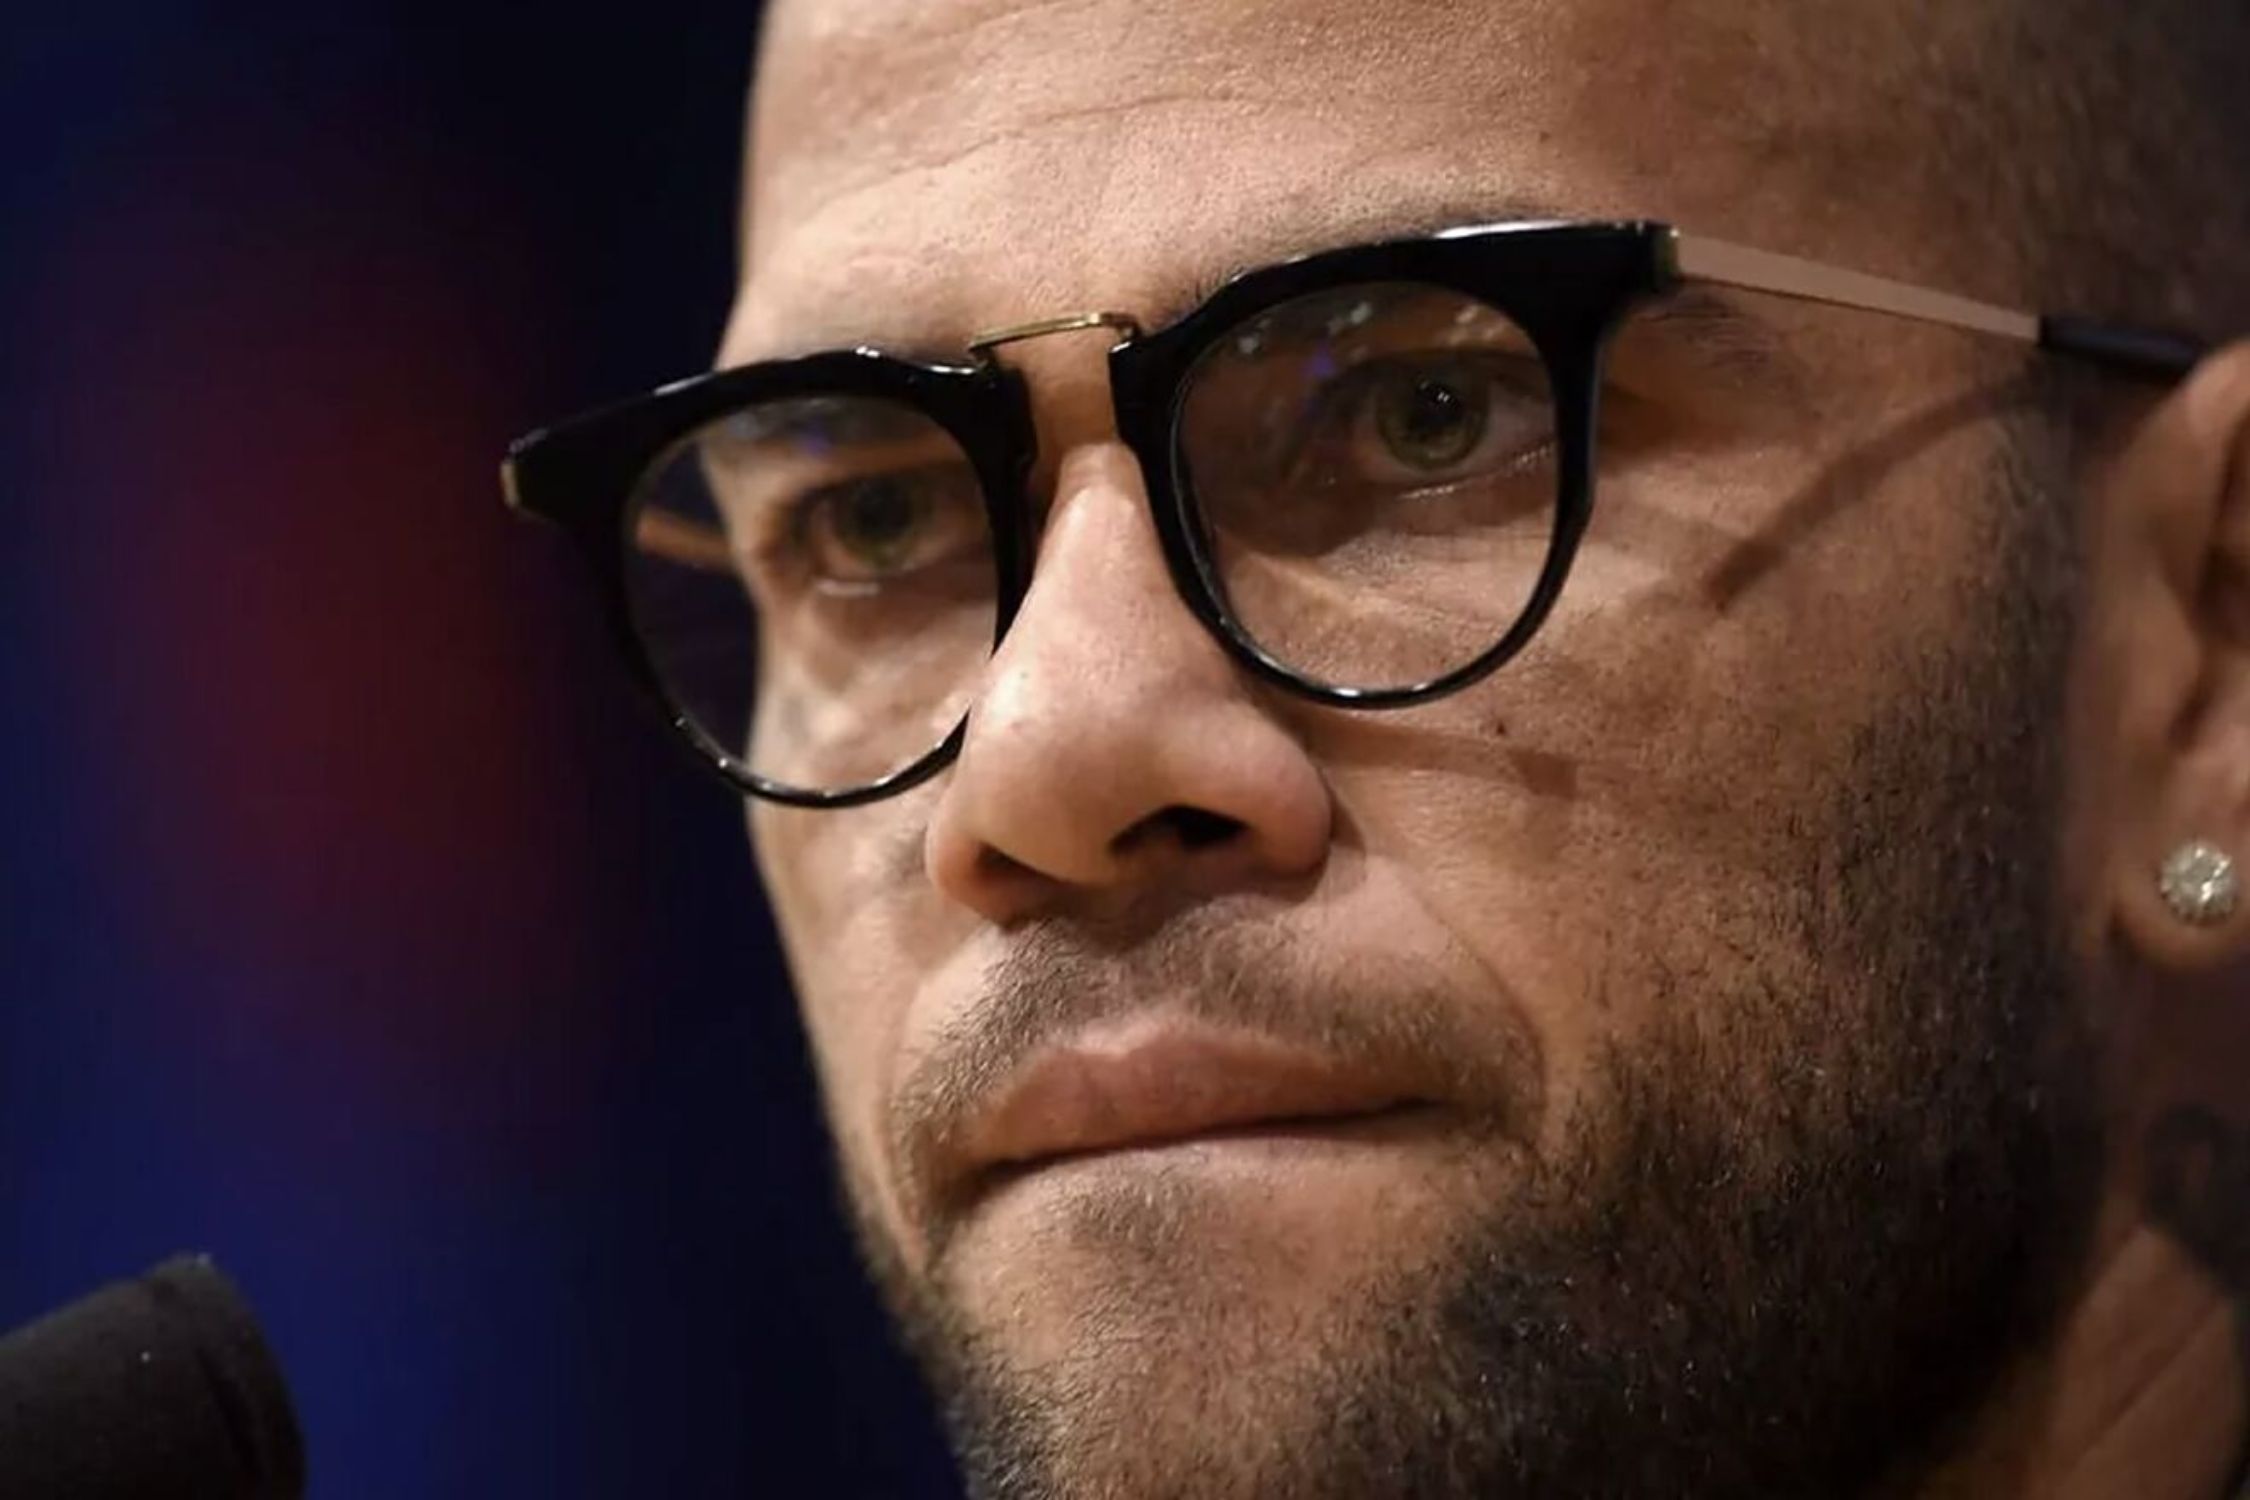 Dani Alves must stay in jail, says court, due to "economic muscle" and flight risk